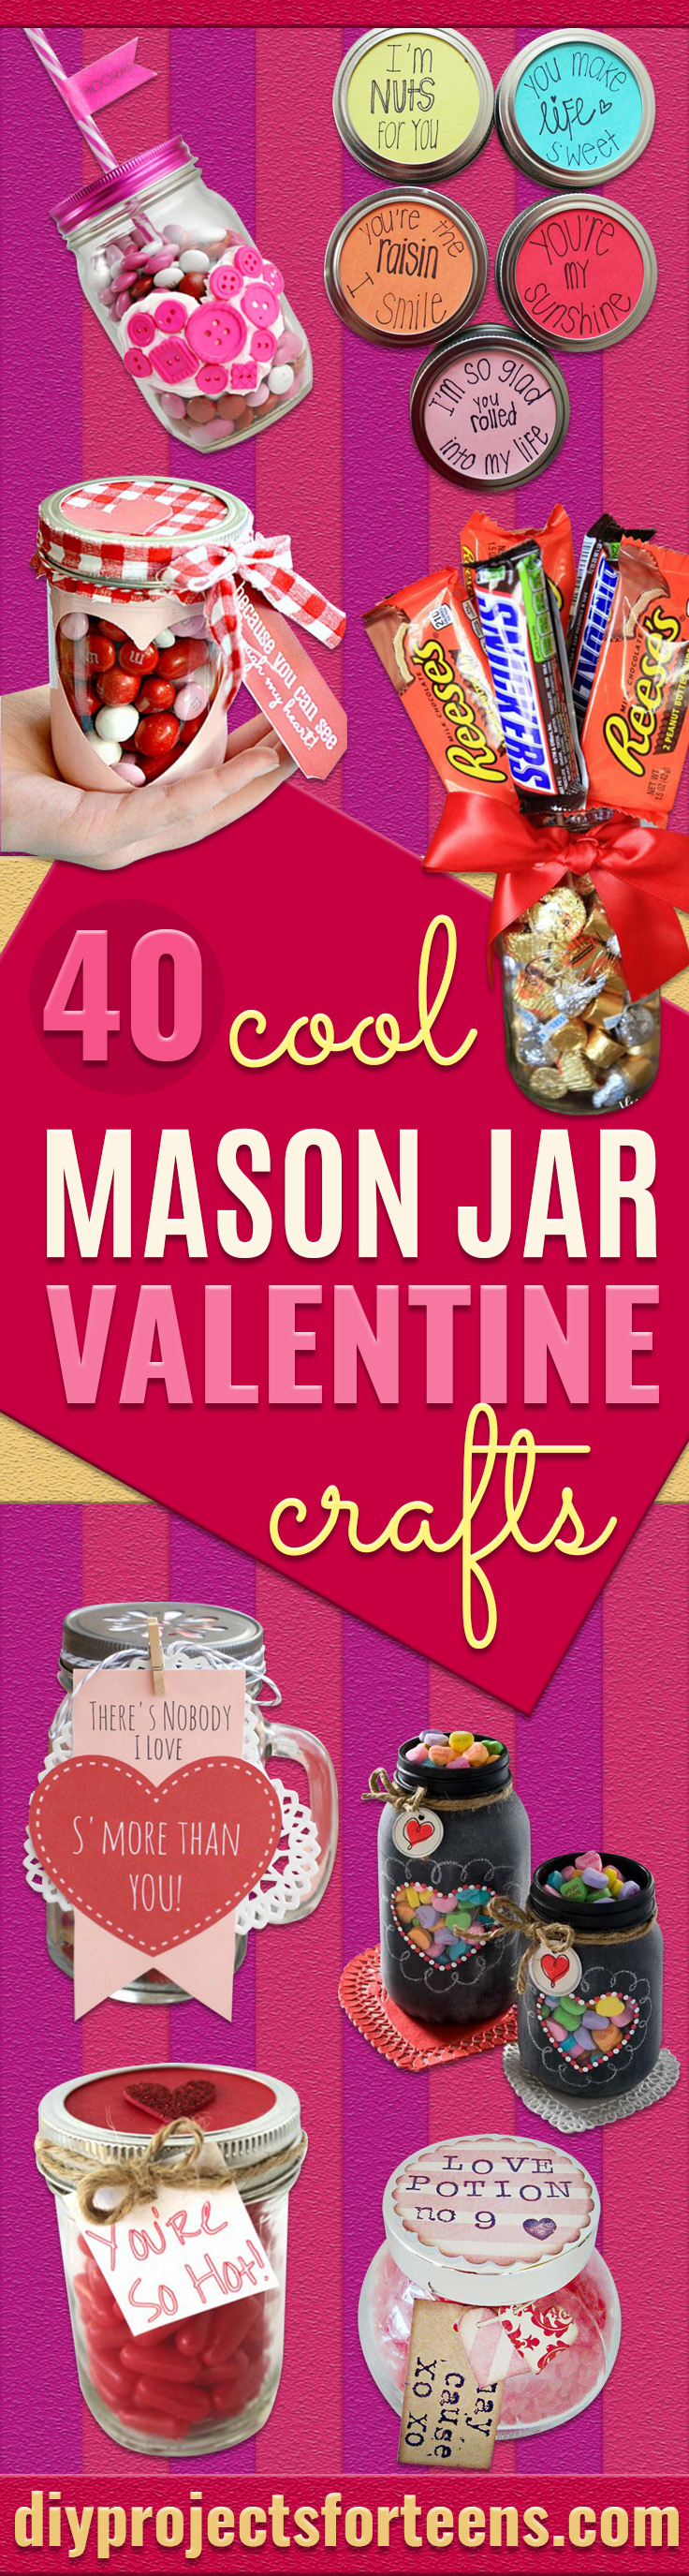 Best Mason Jar Valentine Crafts -Cute Mason Jar Valentines Day Gifts and Crafts | Easy DIY Ideas for Valentines Day for Homemade Gift Giving and Room Decor | Creative Home Decor and Craft Projects for Teens, Teenagers, Kids and Adults 